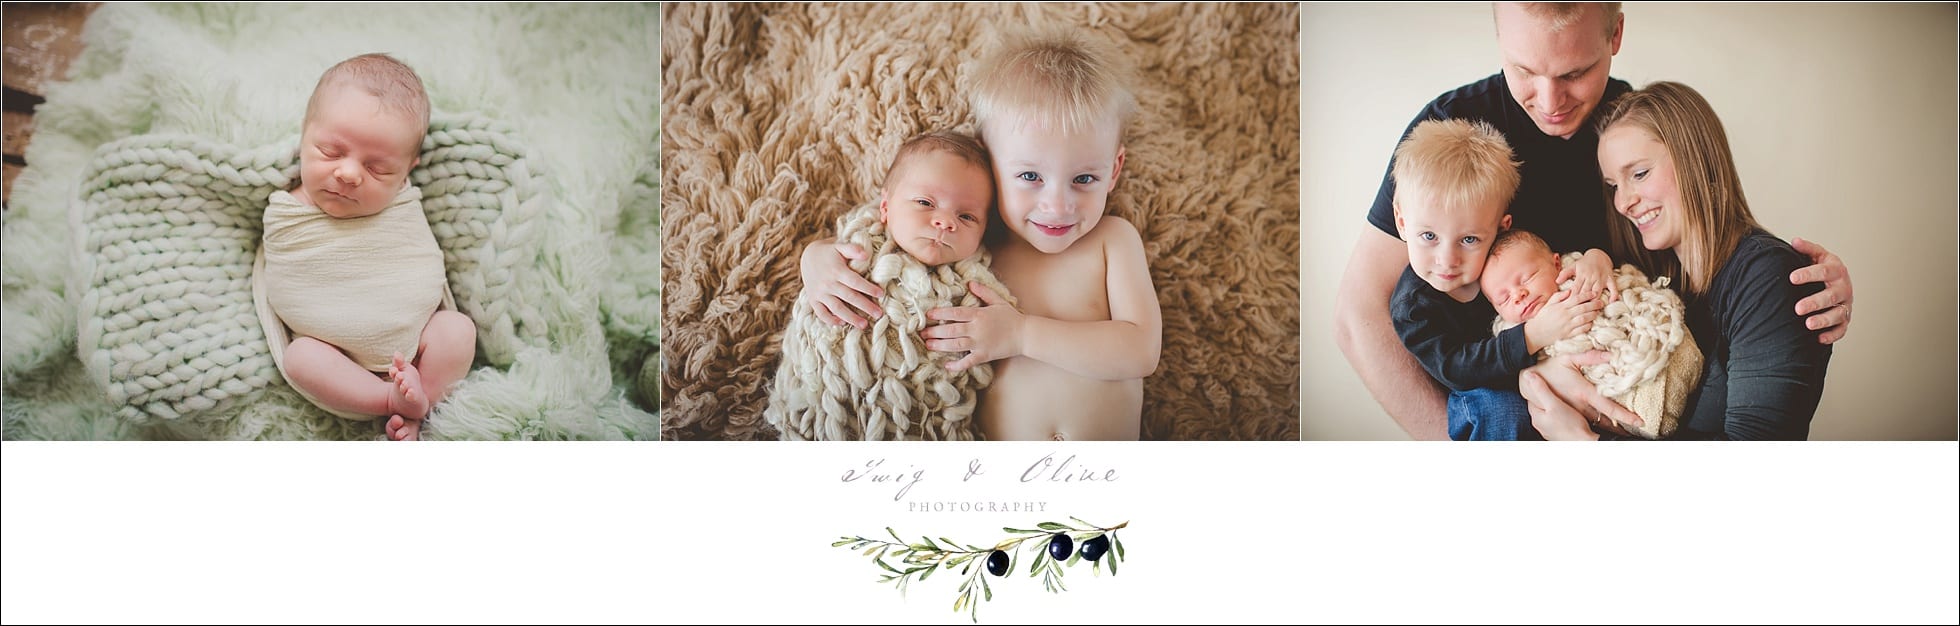 children and family session, newborn, siblings, happy babies